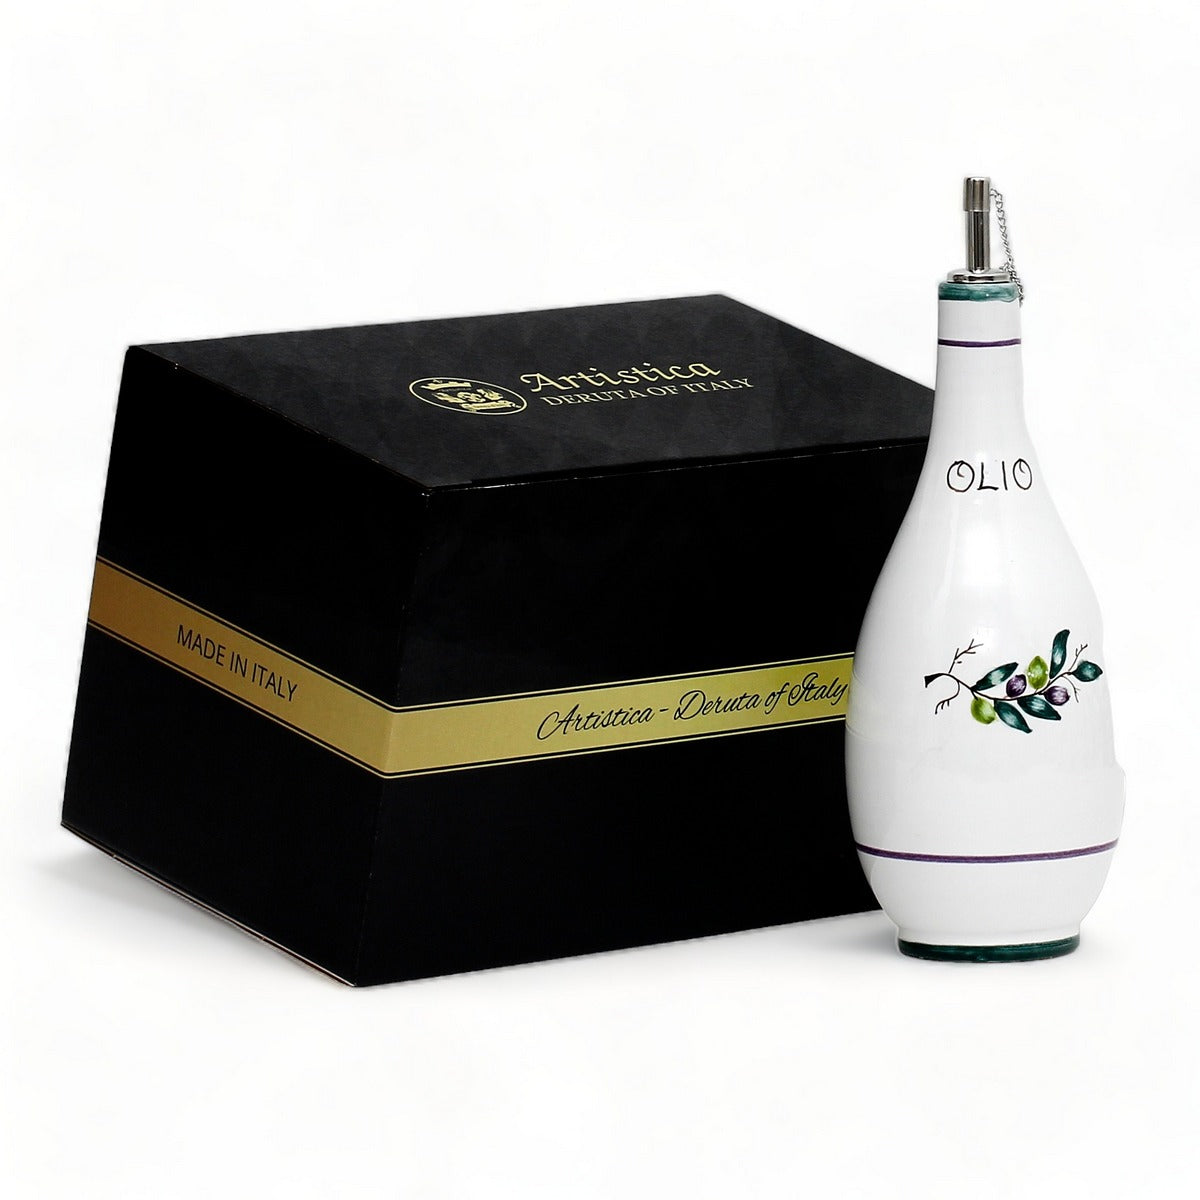 GIFT BOX: With authentic Deruta hand painted ceramic - OLIVE OIL DISPENSER BOTTLE WITH OLIVA DESIGN